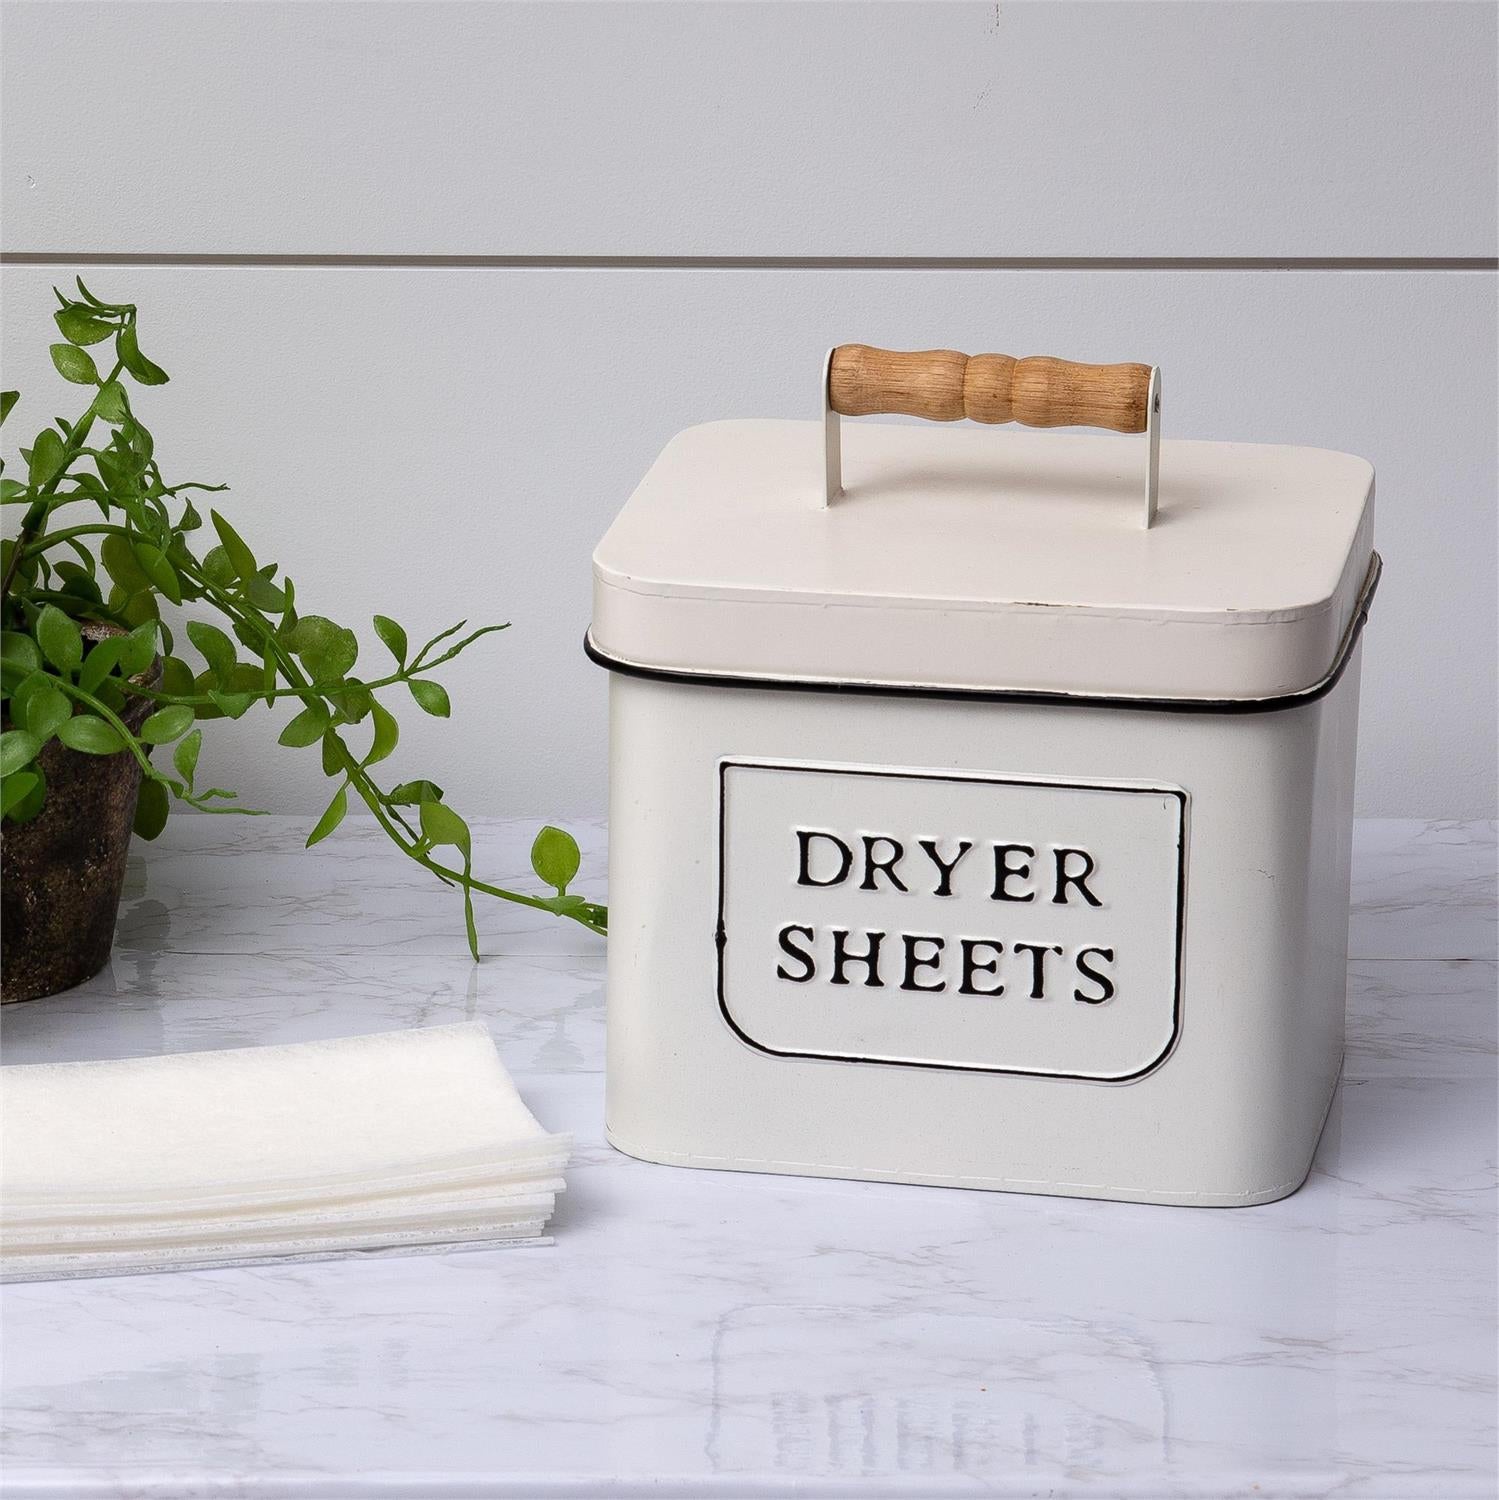 Add a touch of vintage style to your laundry room organization with this Dryer Sheets Storage Bin. Made of metal, it features an ivory white weathered finish with black lettering and trim and a vintage style wood handle. 7.25W x 6.25D x 8H